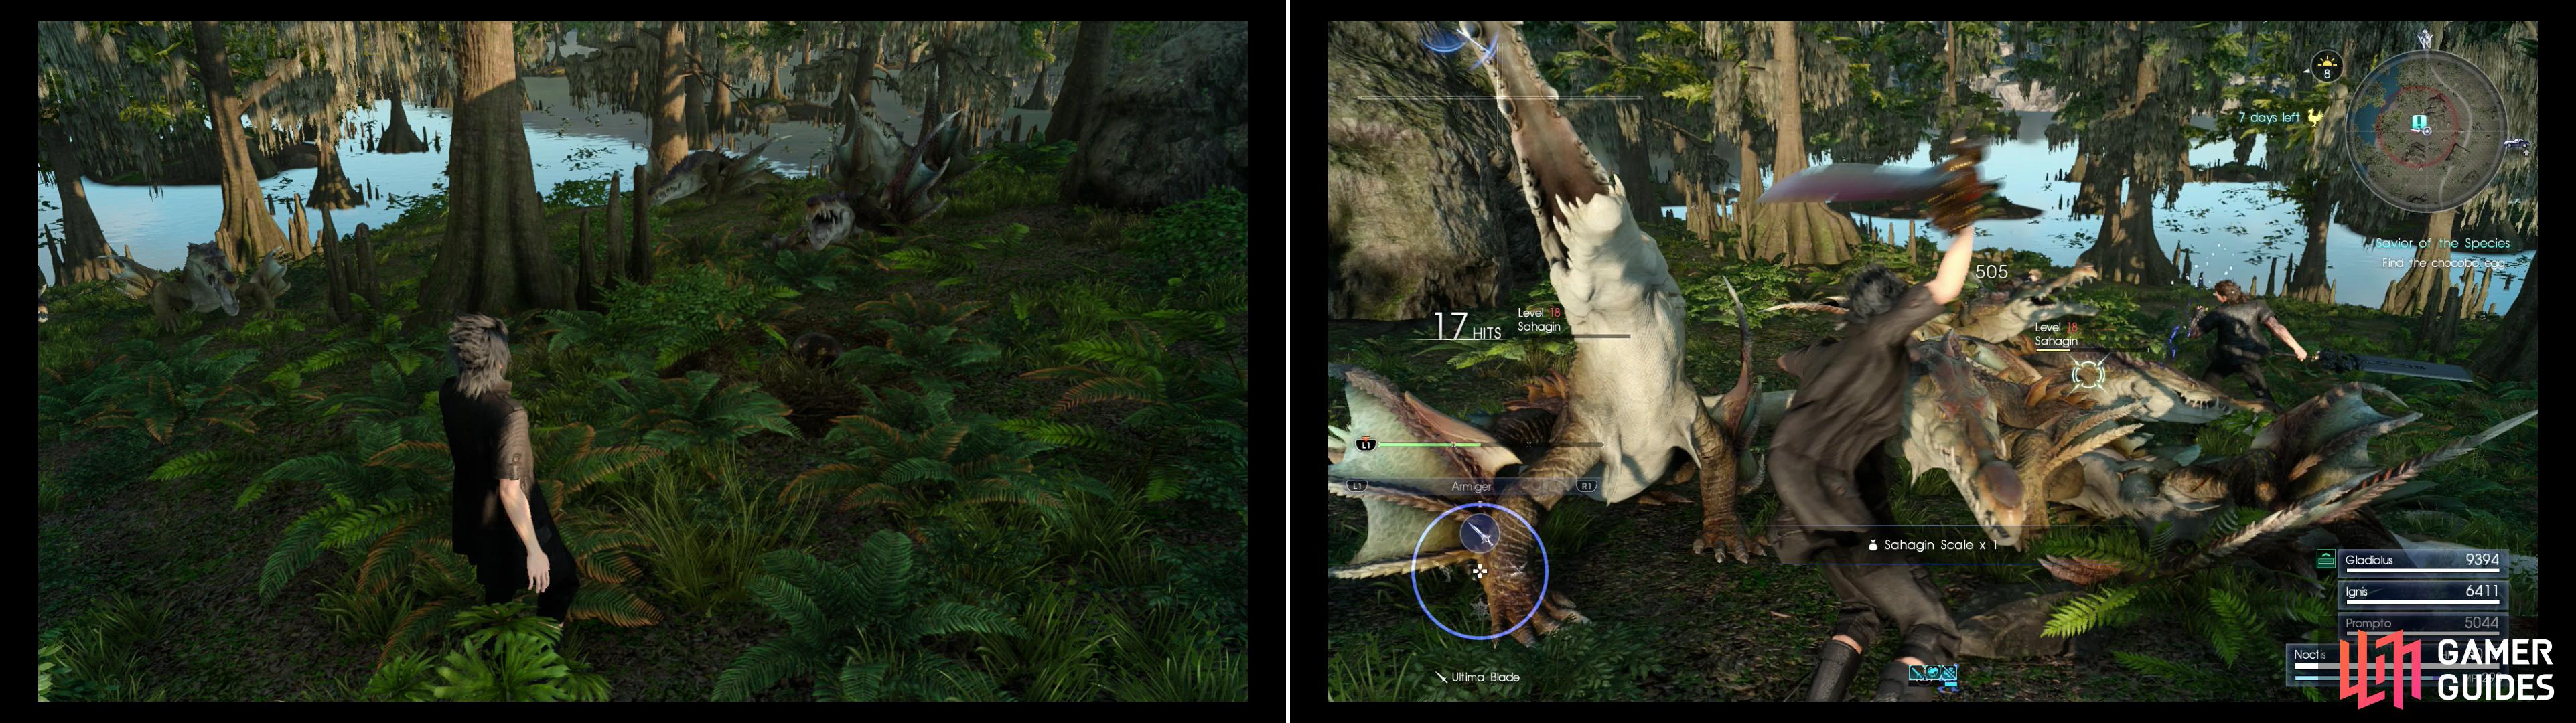 Fine the Black Chocobo Egg to discover that some other, hungry predators want the egg (left). Teach the Sahagin their place in the food chain and protect the egg (right).